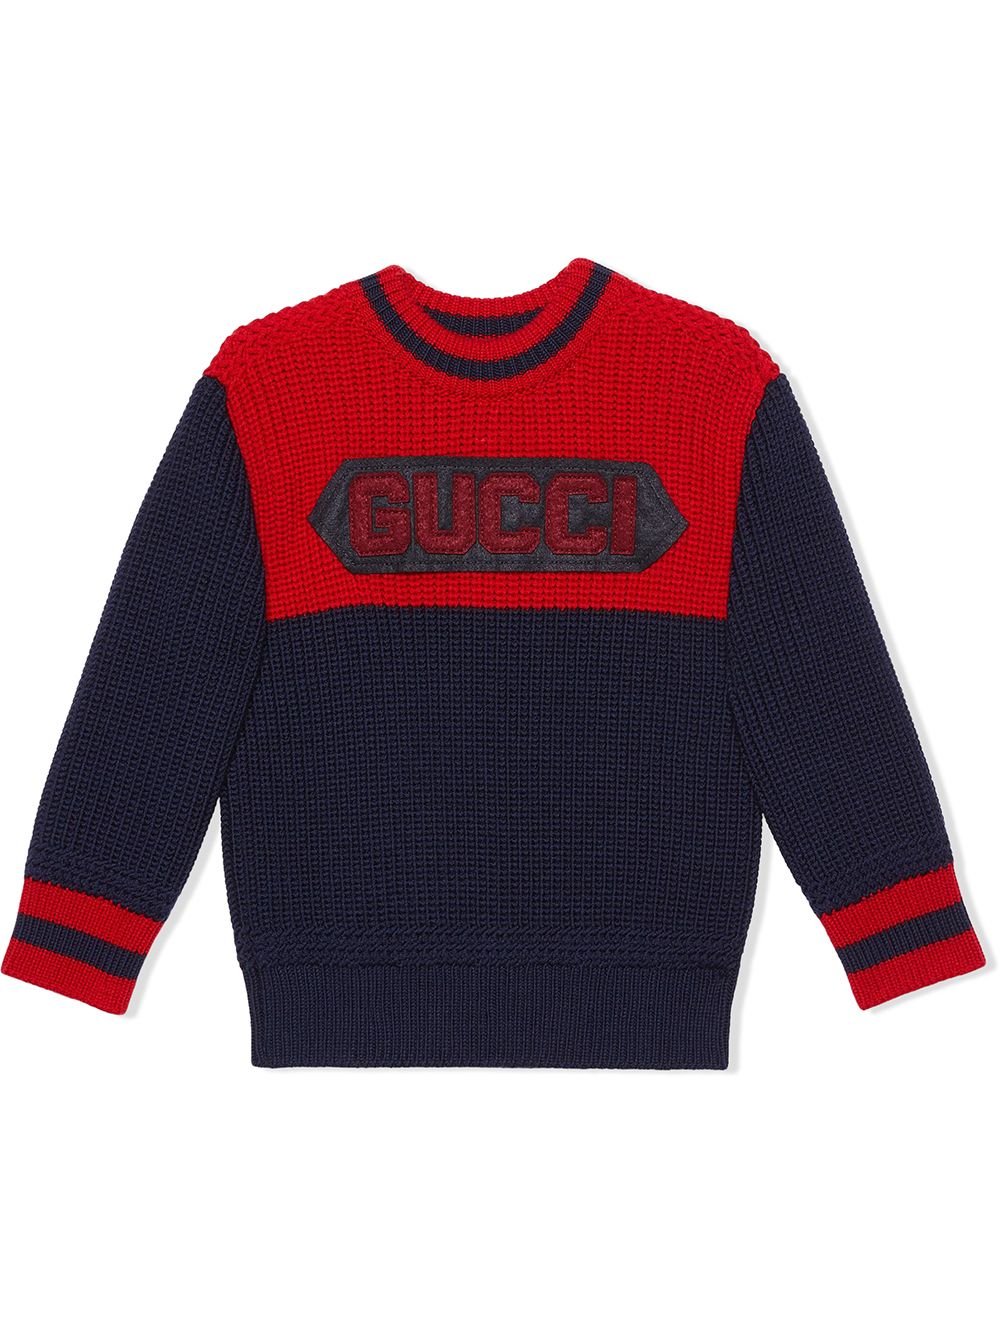 Blue and red sweater for boys